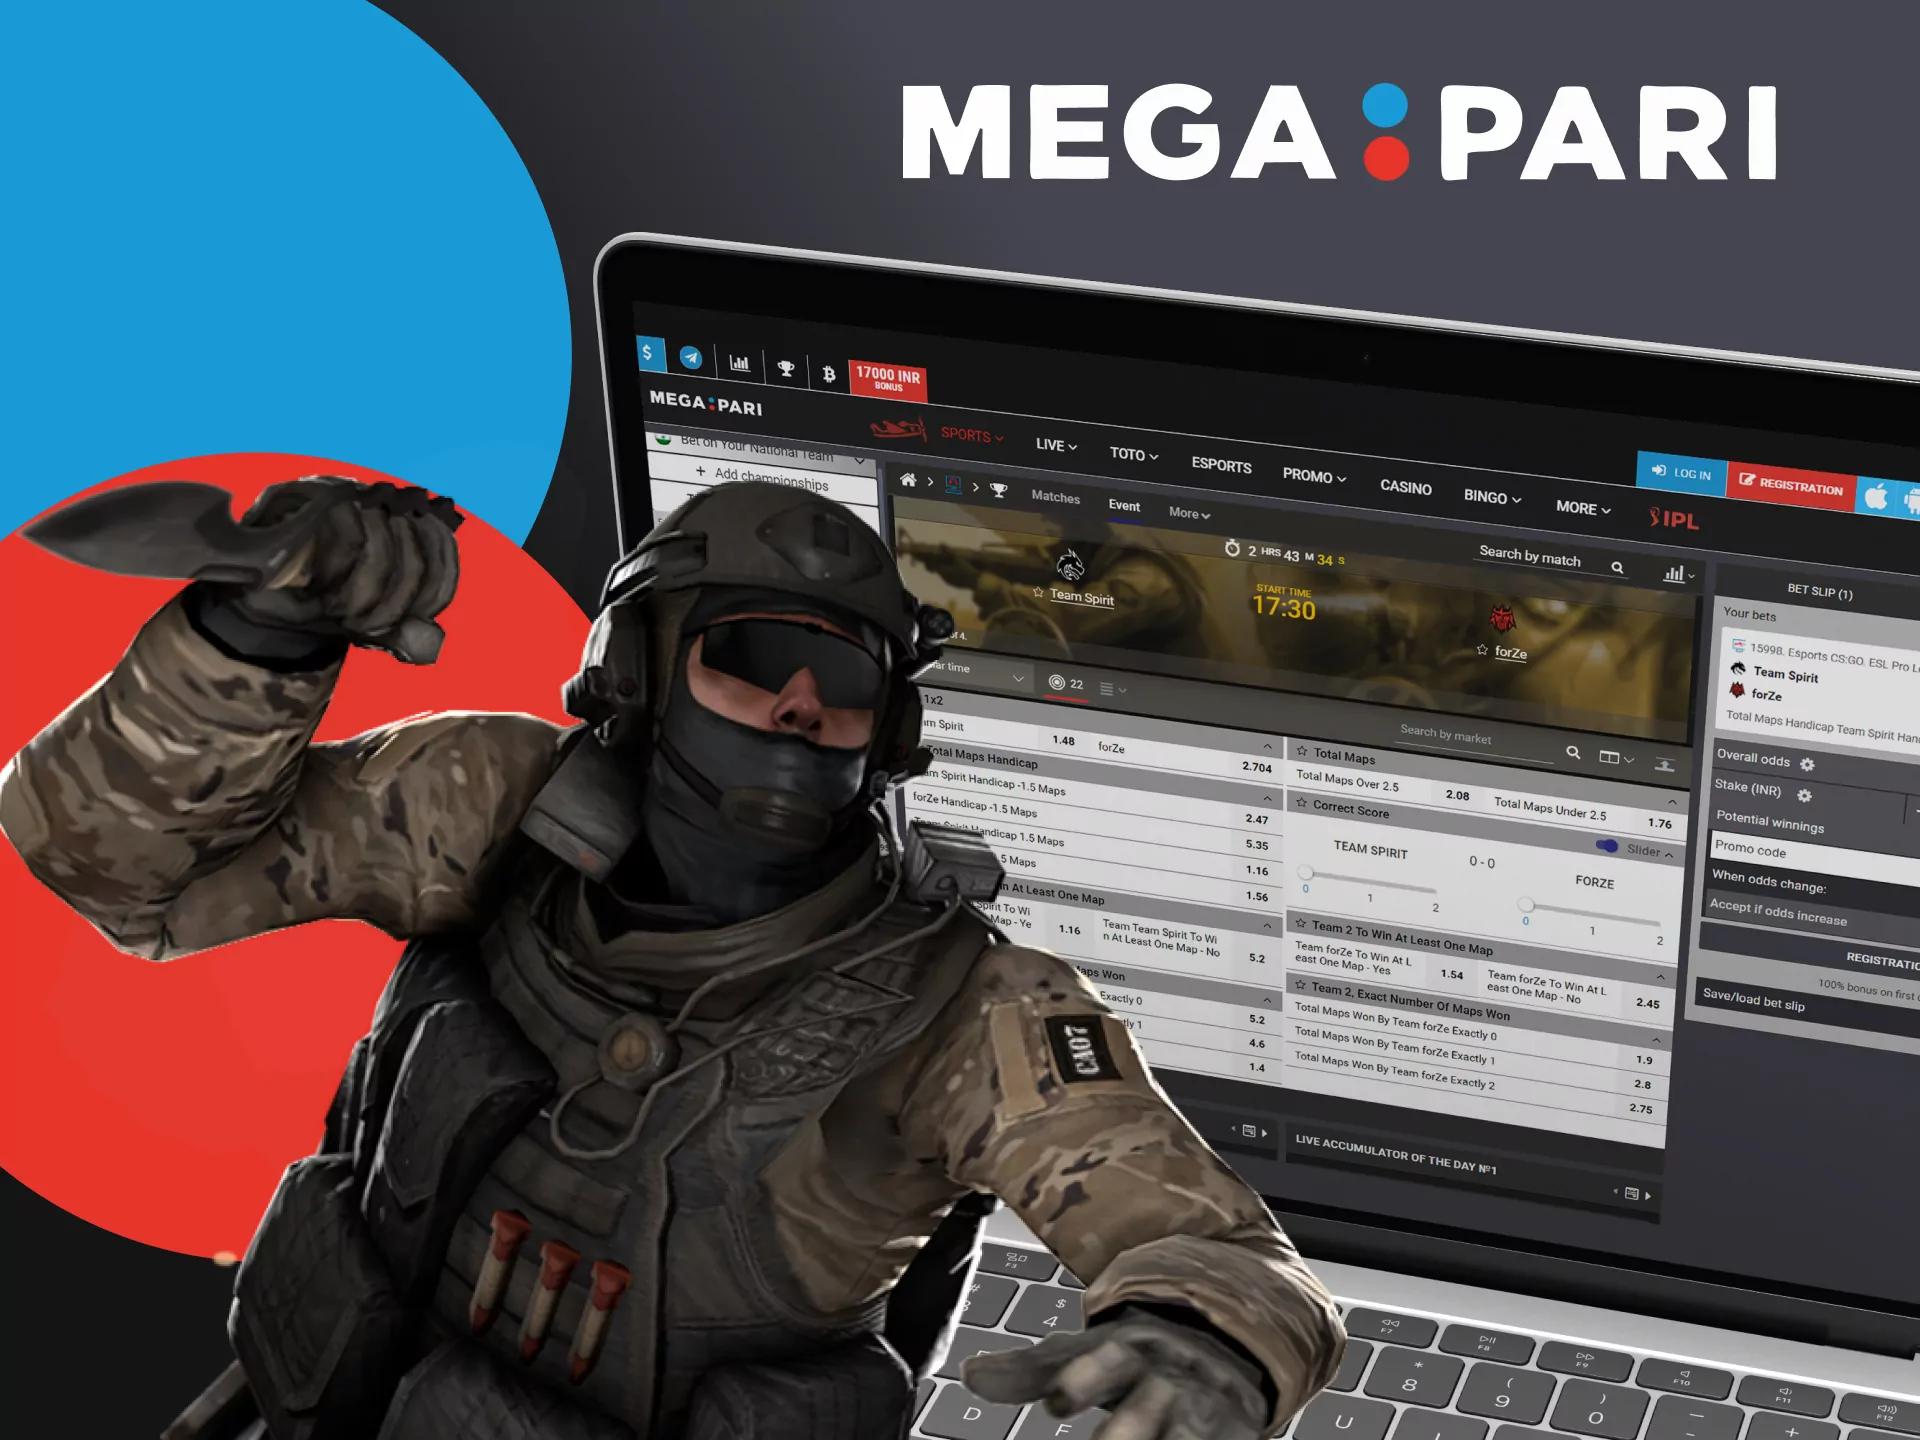 For esports betting, you will benefit from Megapari.